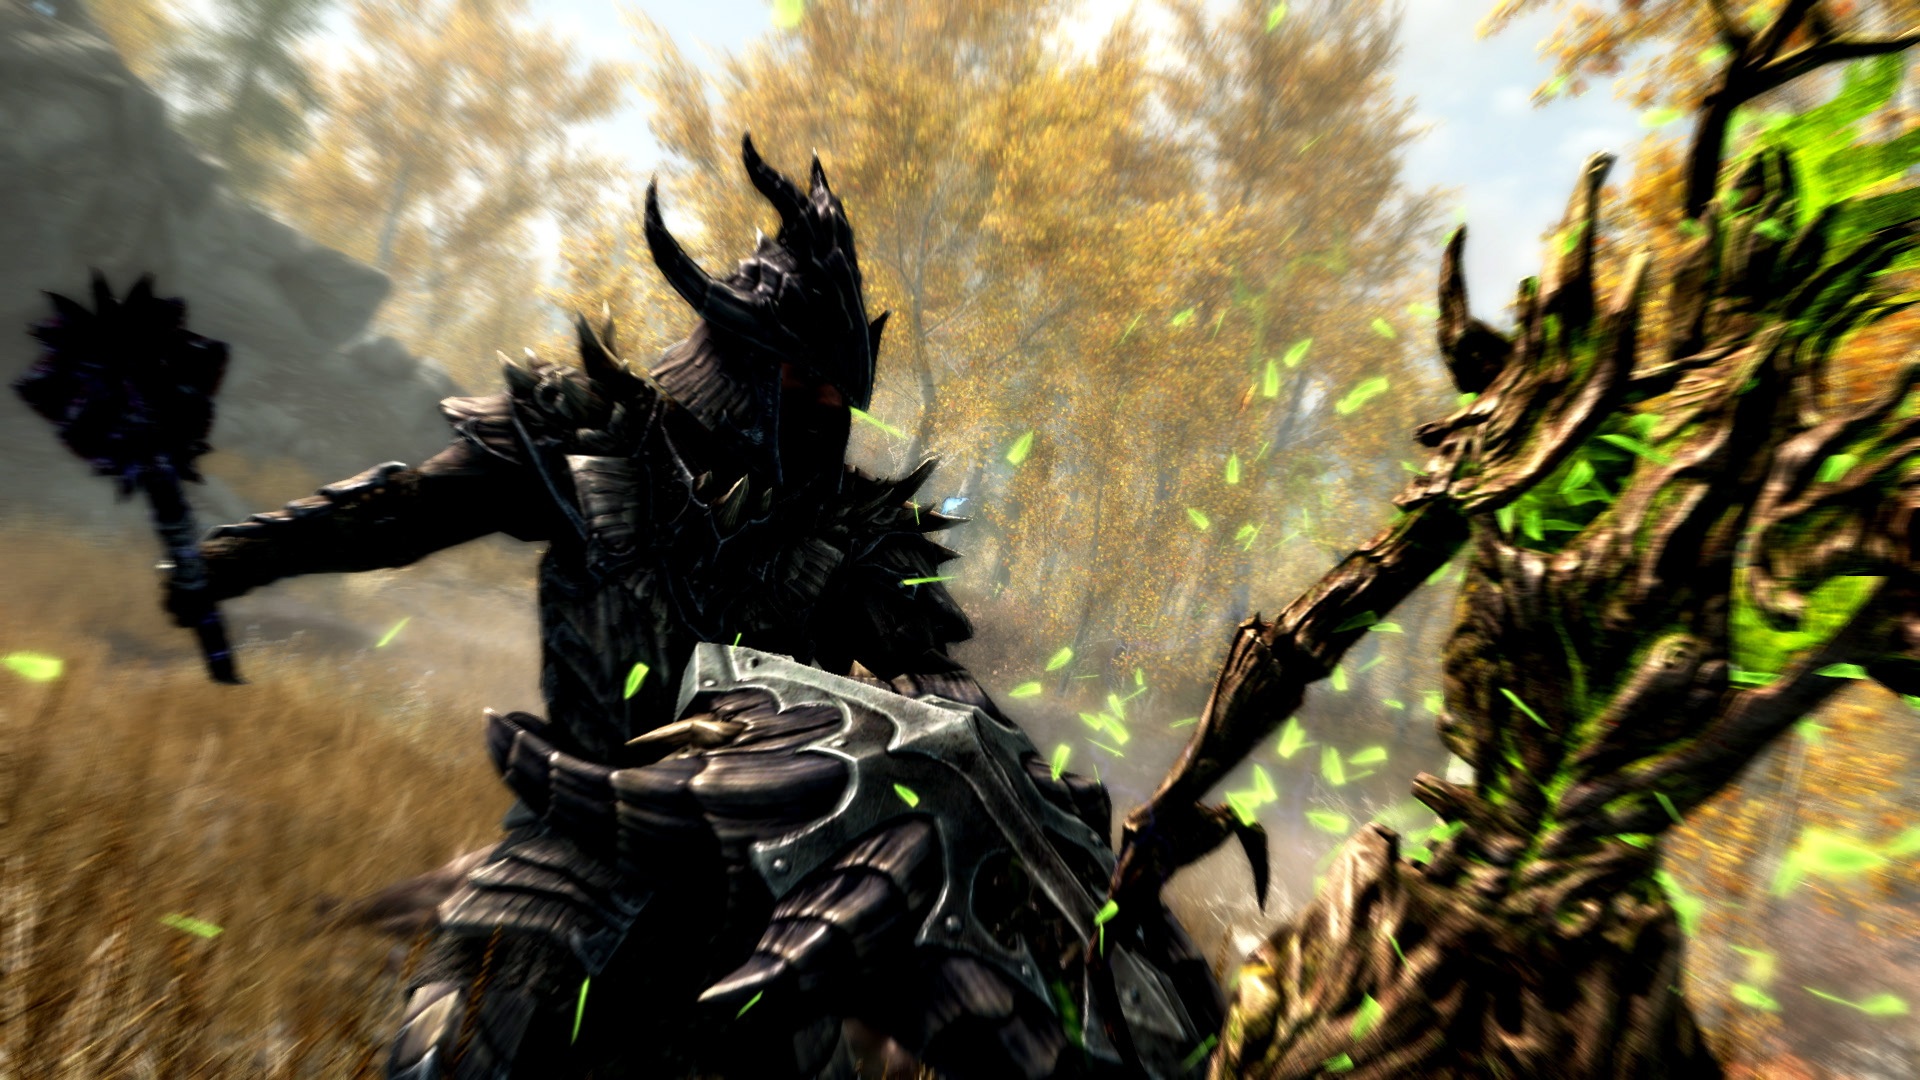 A one-on-one battle in Skyrim